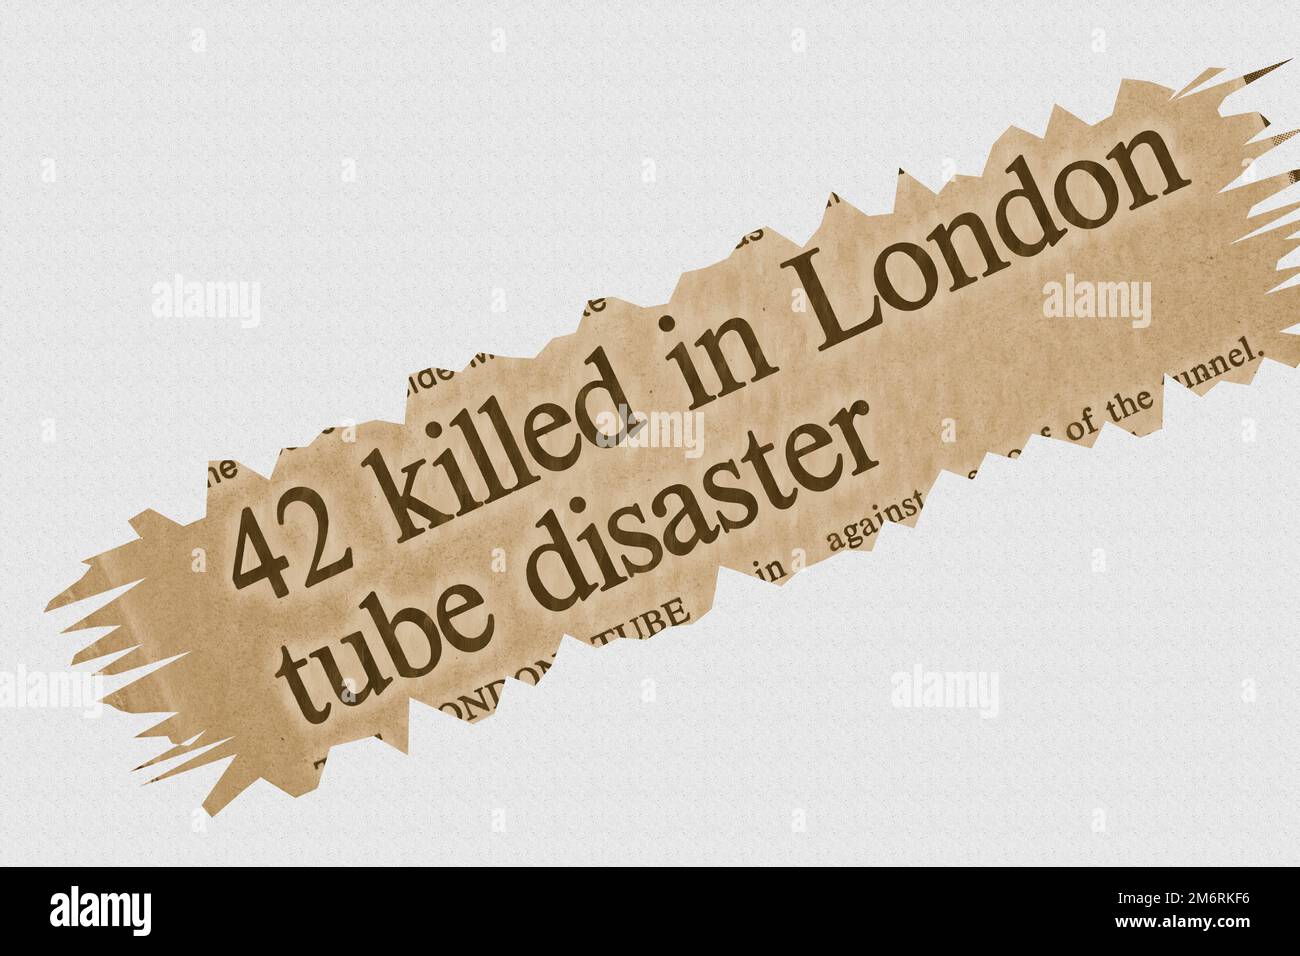 21 Killed in London tube disaster - news story from 1975 newspaper headline article title with highlight sepia overlay Stock Photo